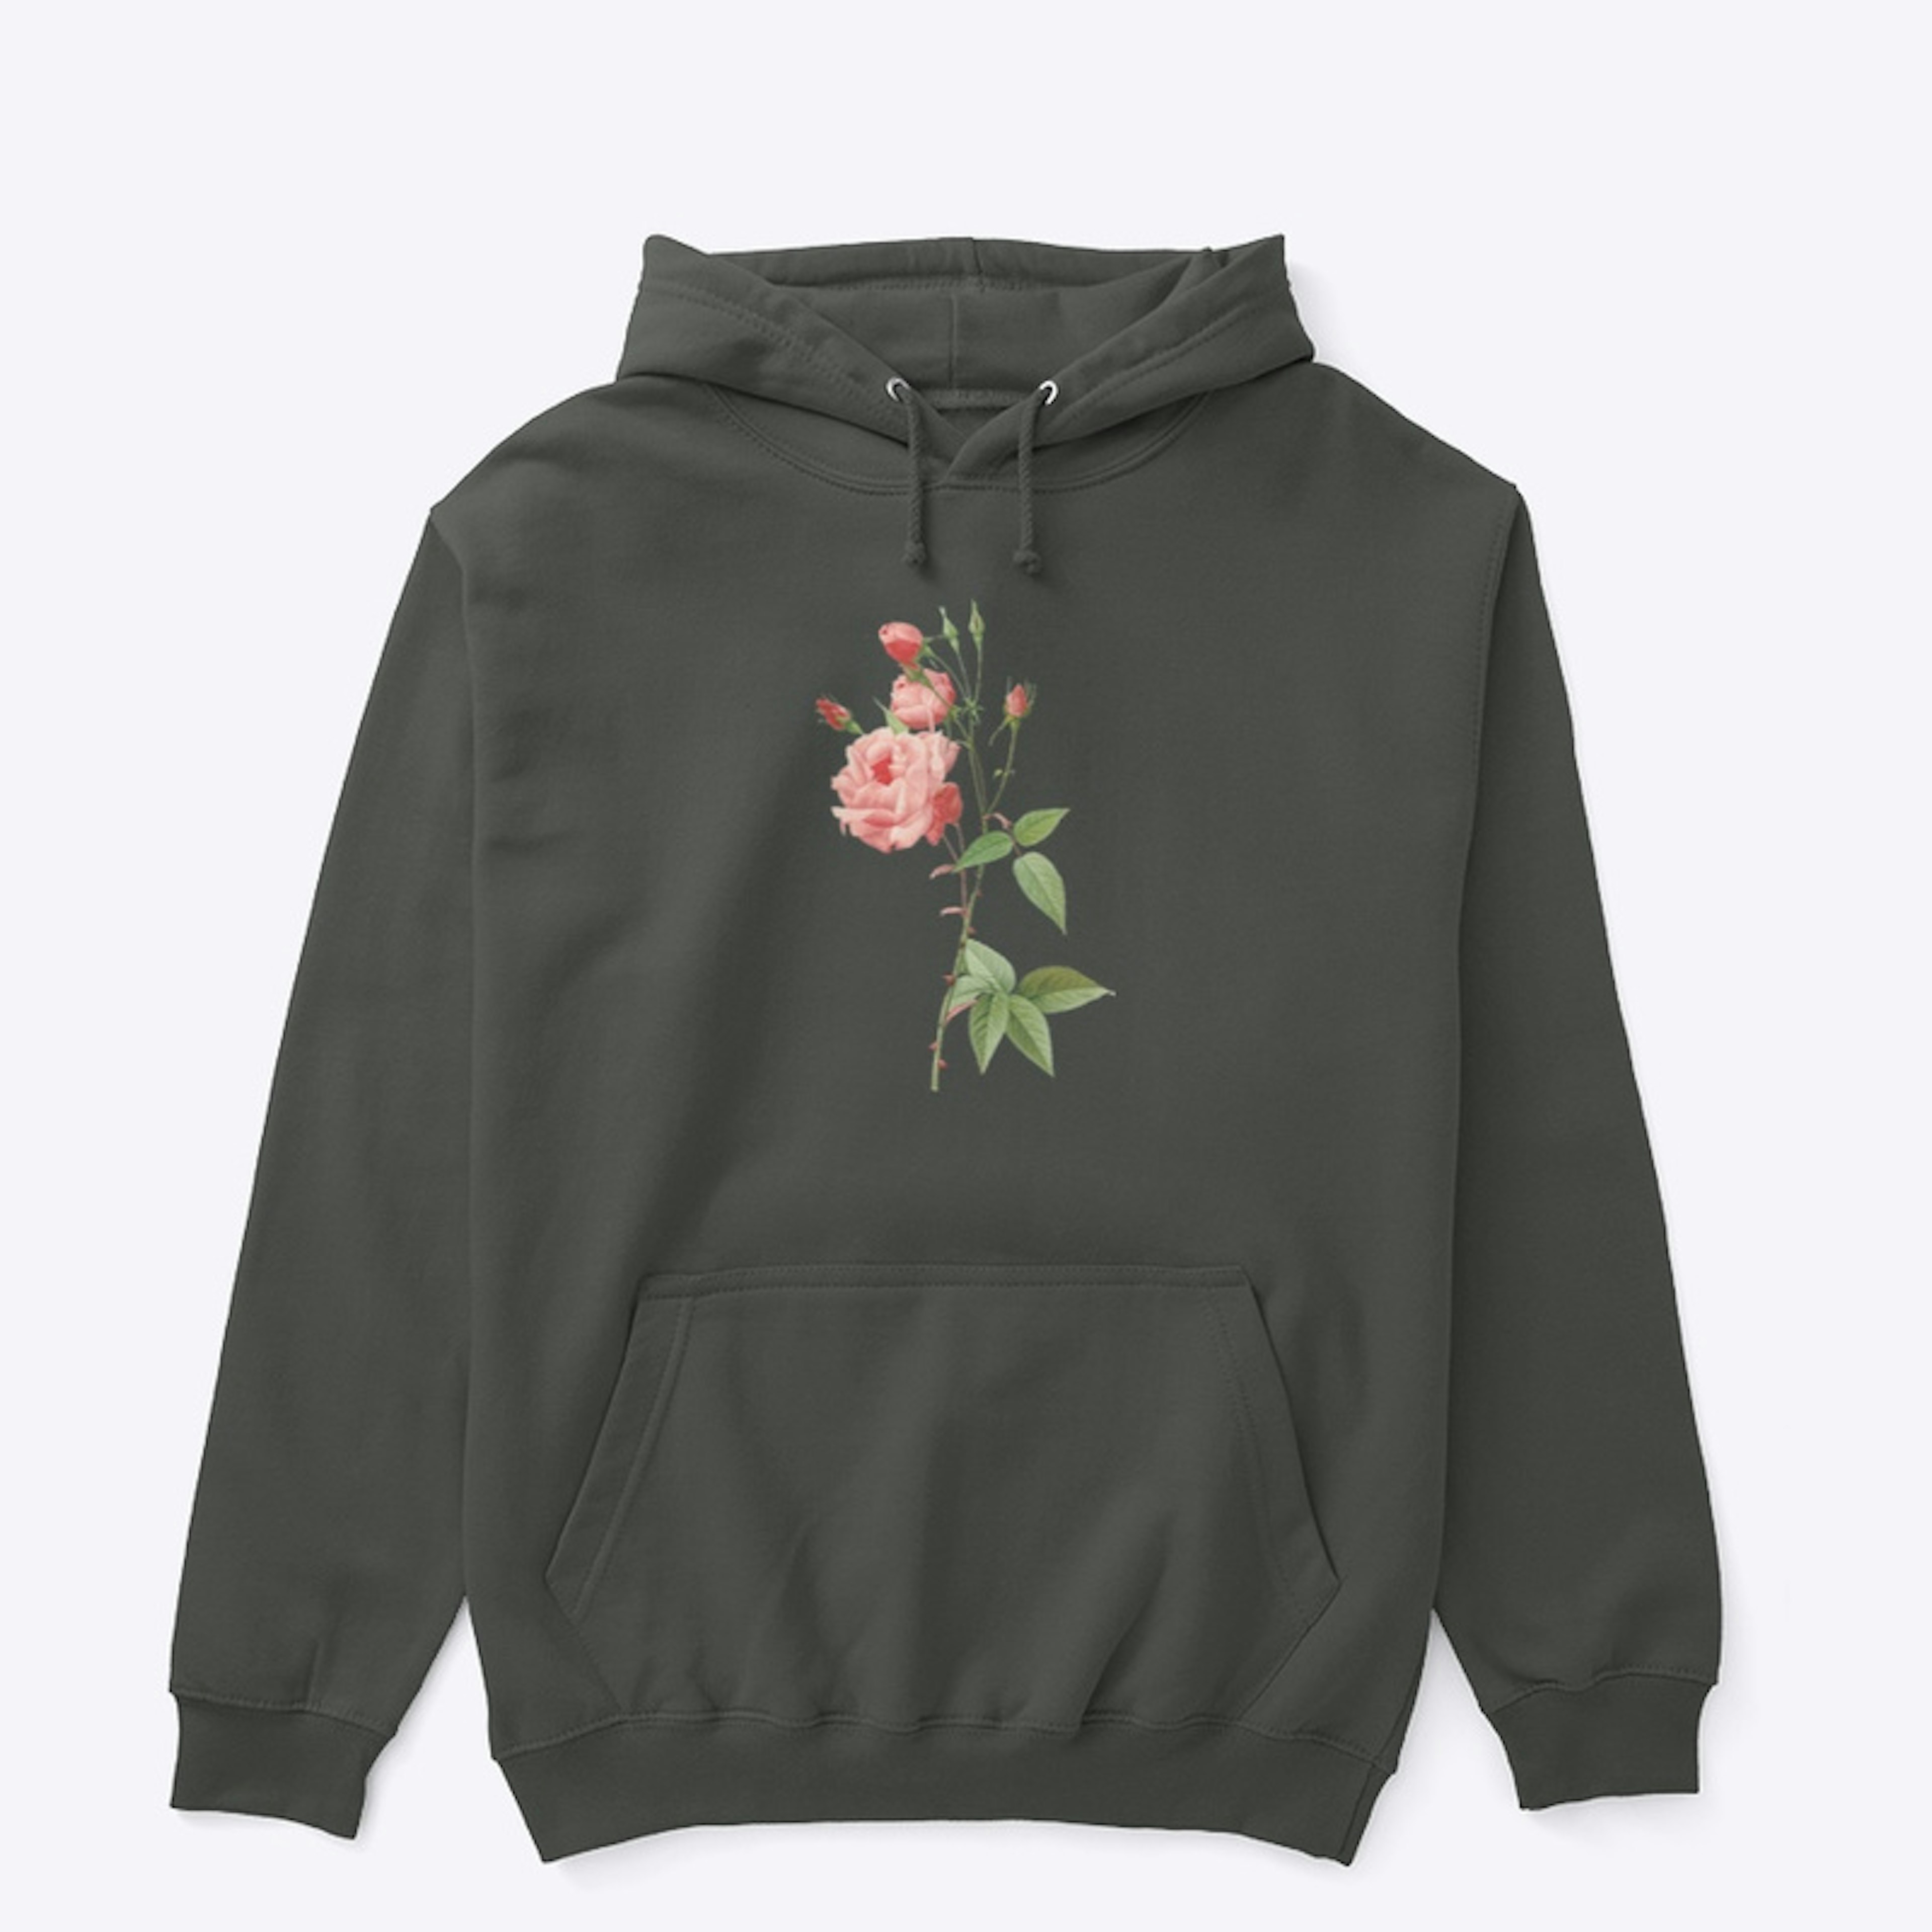 BE THE STORM Pullover Hoodie